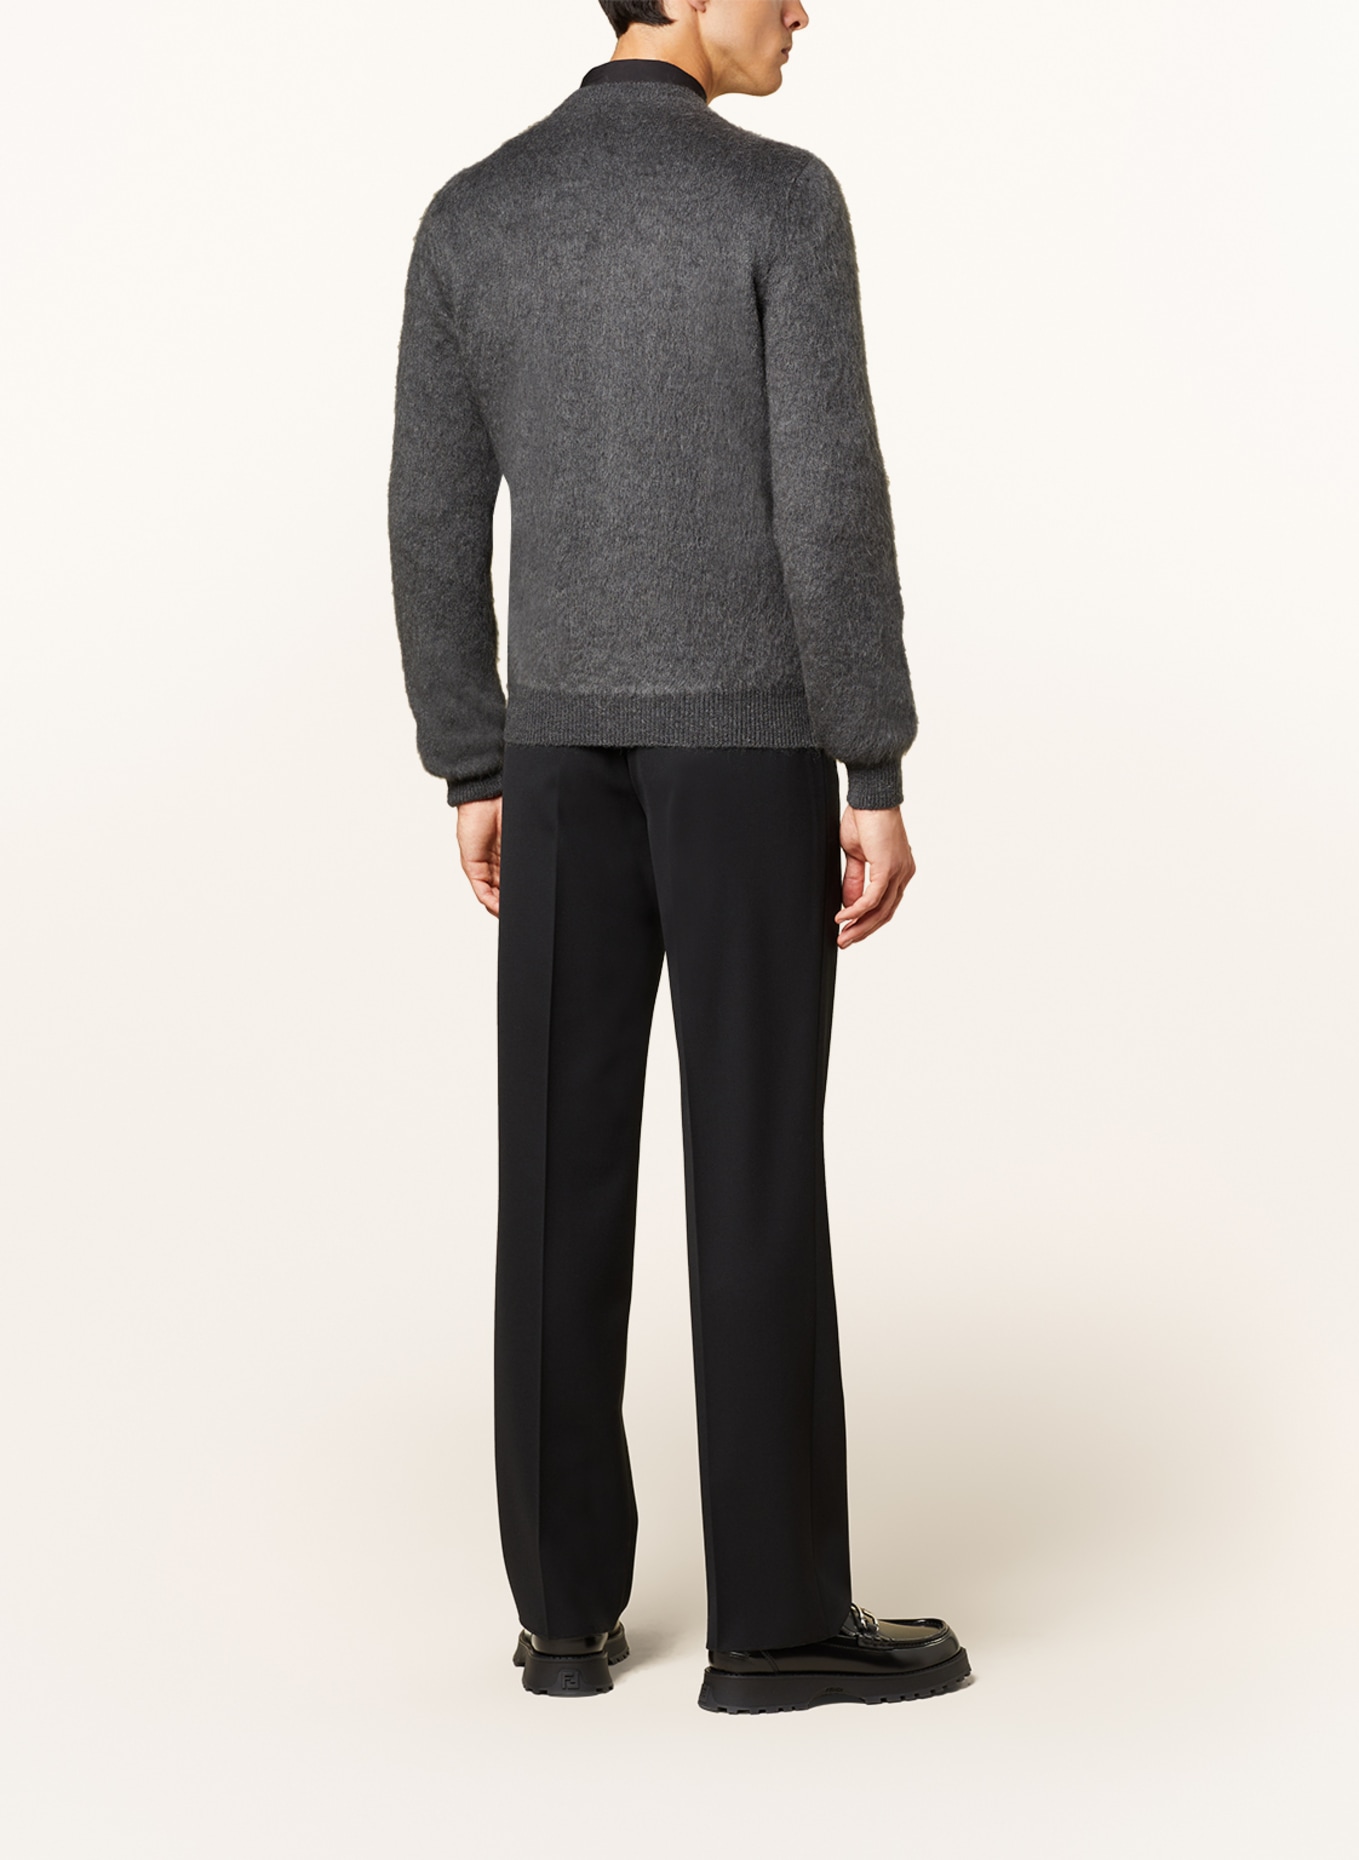 FENDI Sweater with mohair, Color: GRAY/ LIGHT GRAY (Image 3)